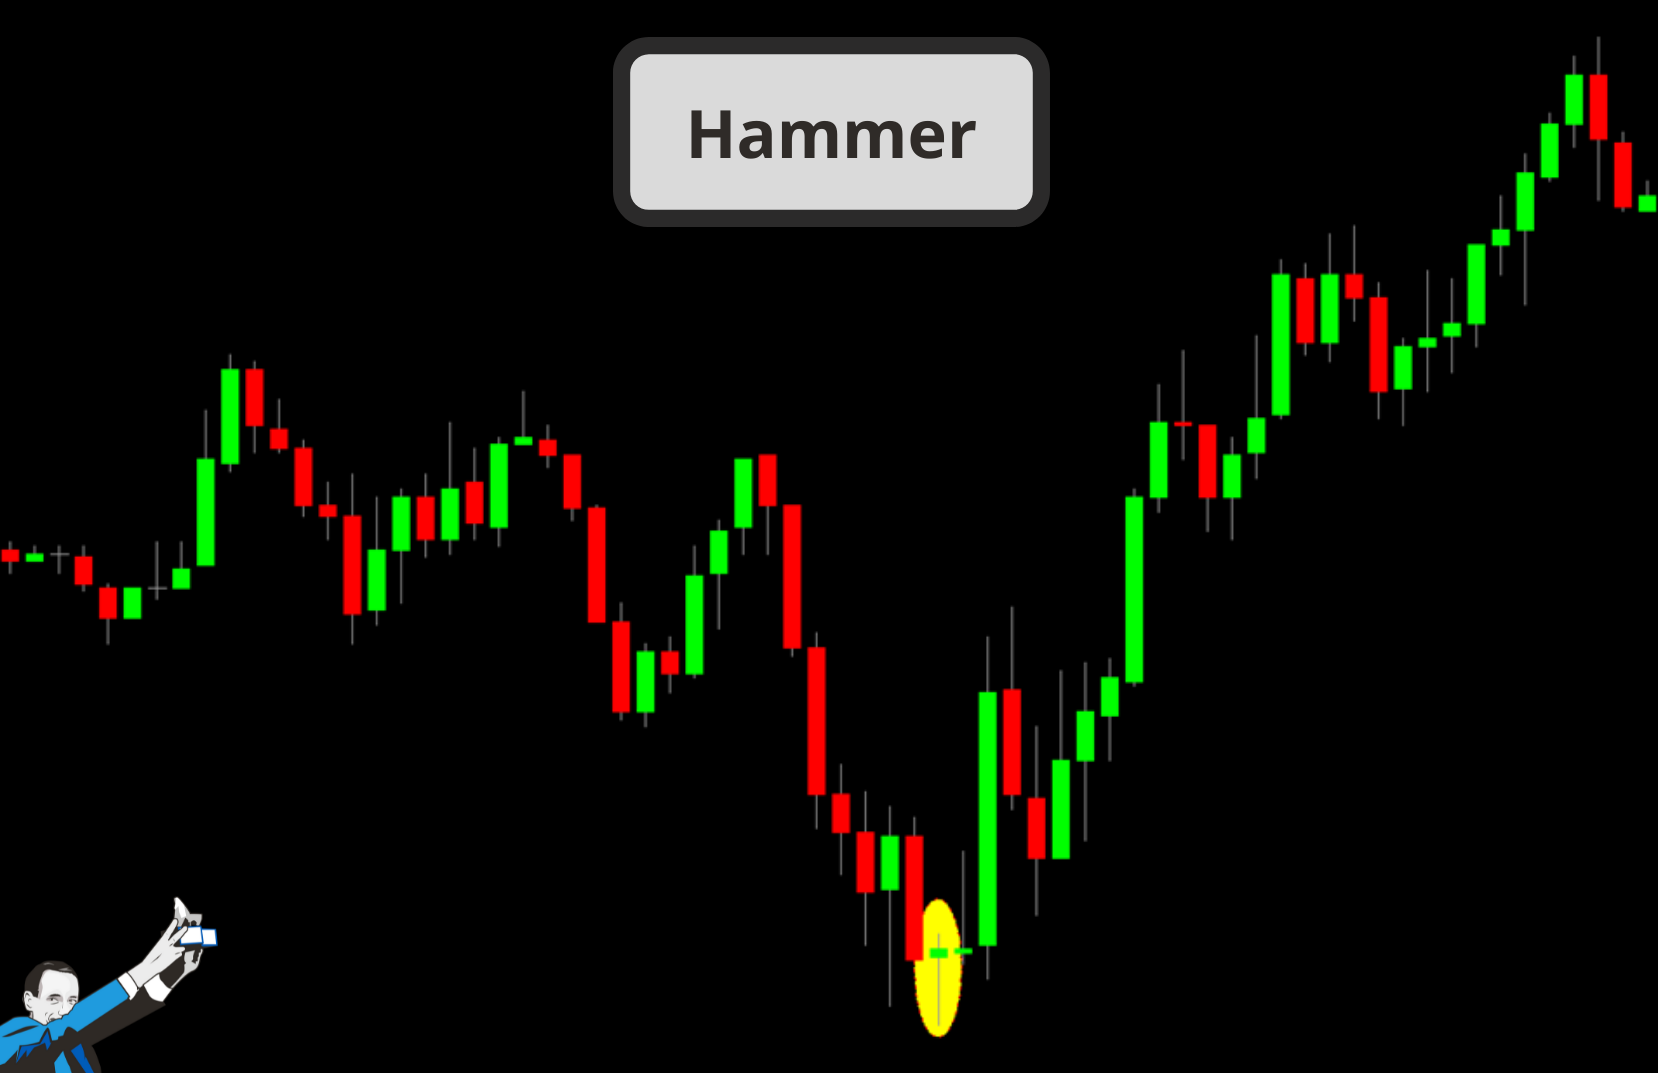 inverted hammer trading price pattern